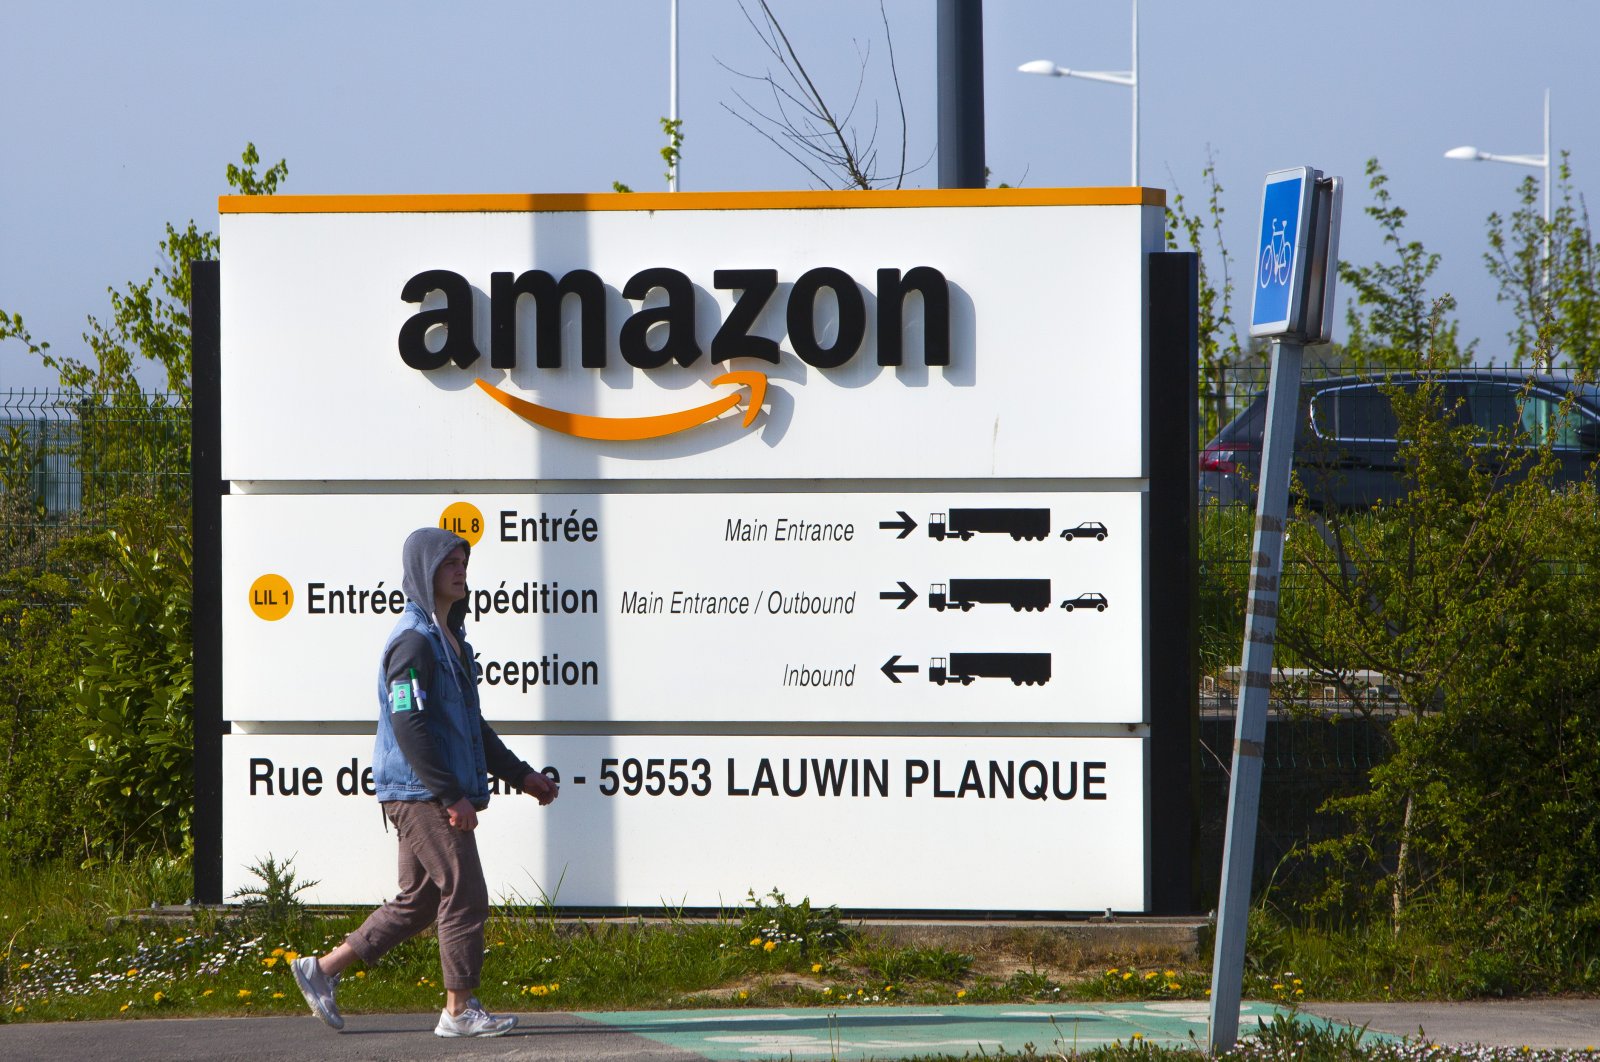 A man walks at the entrance of Amazon, in Douai, northern France, April 16, 2020. (AP Photo)